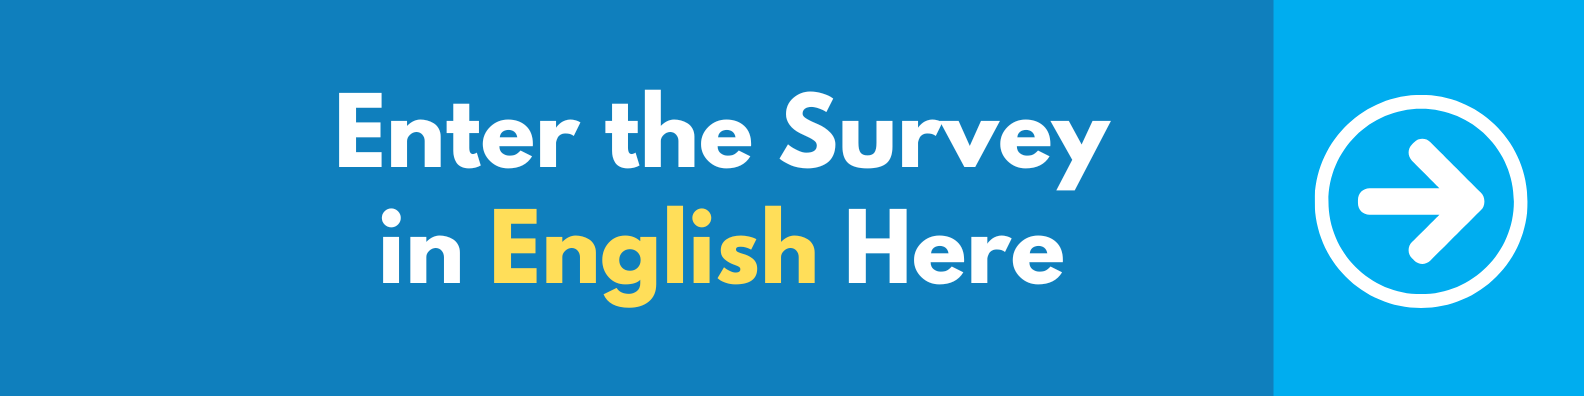 Enter the Survey in English Here